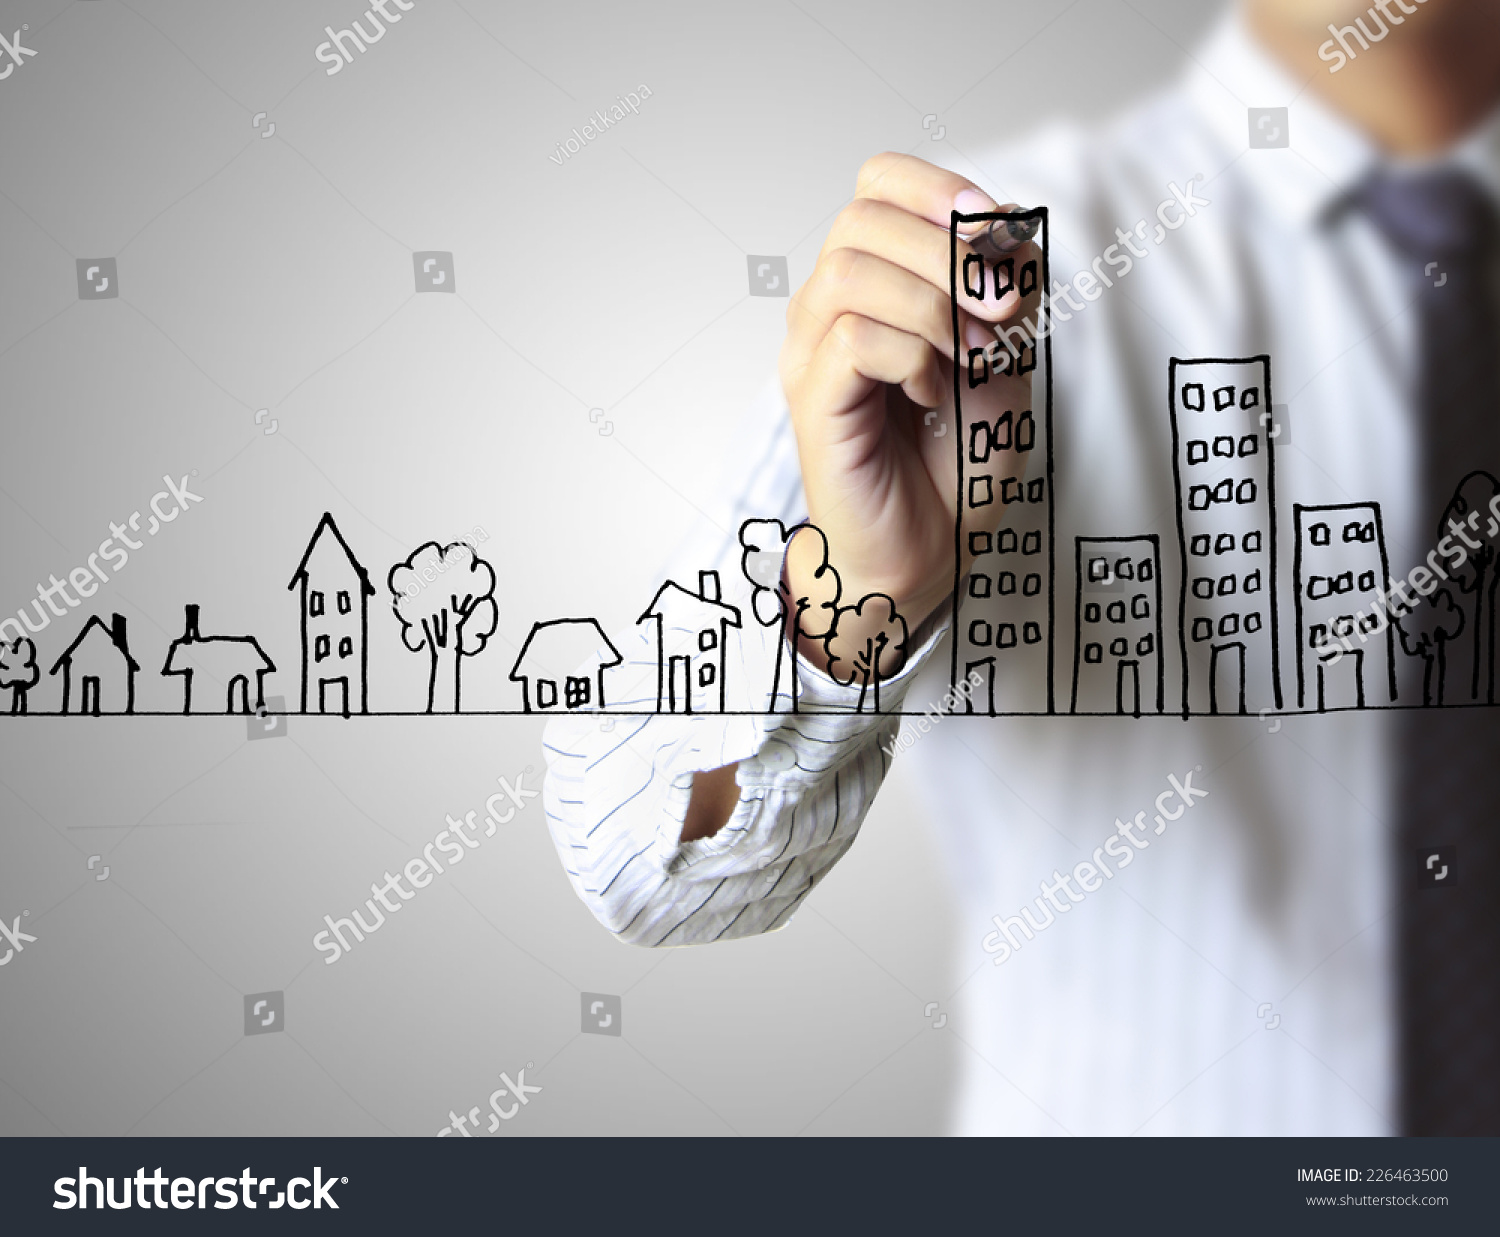 Real estate, Business man drawing a house  #226463500